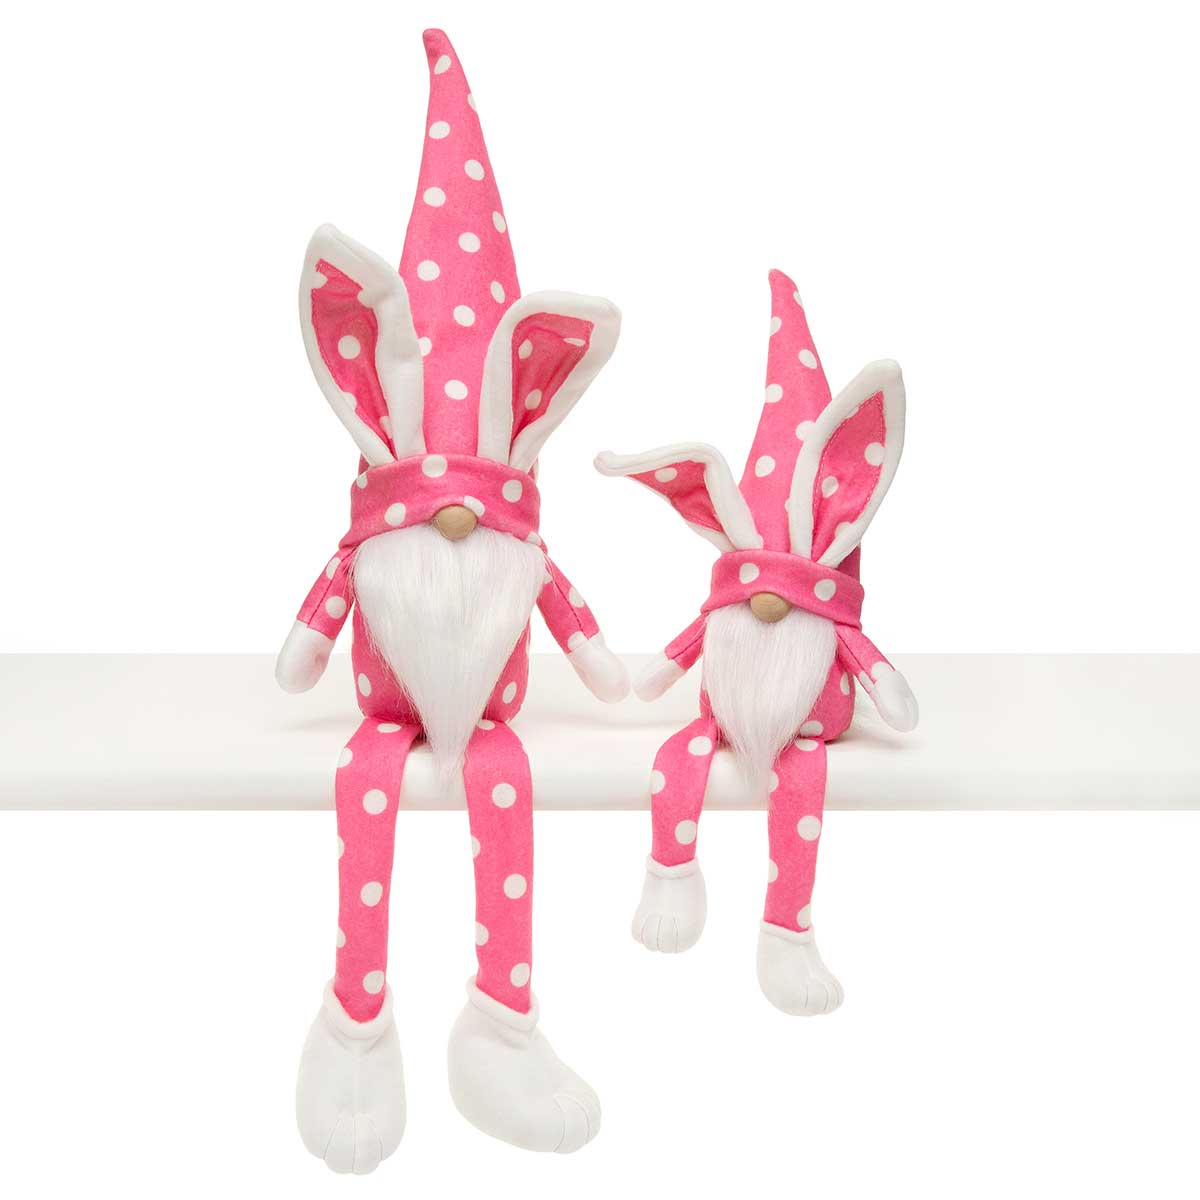 b70 GNOME DOT BUNNY LEGS SMALL 3.5IN X 4.5IN X 13.5IN PINK/WHITE